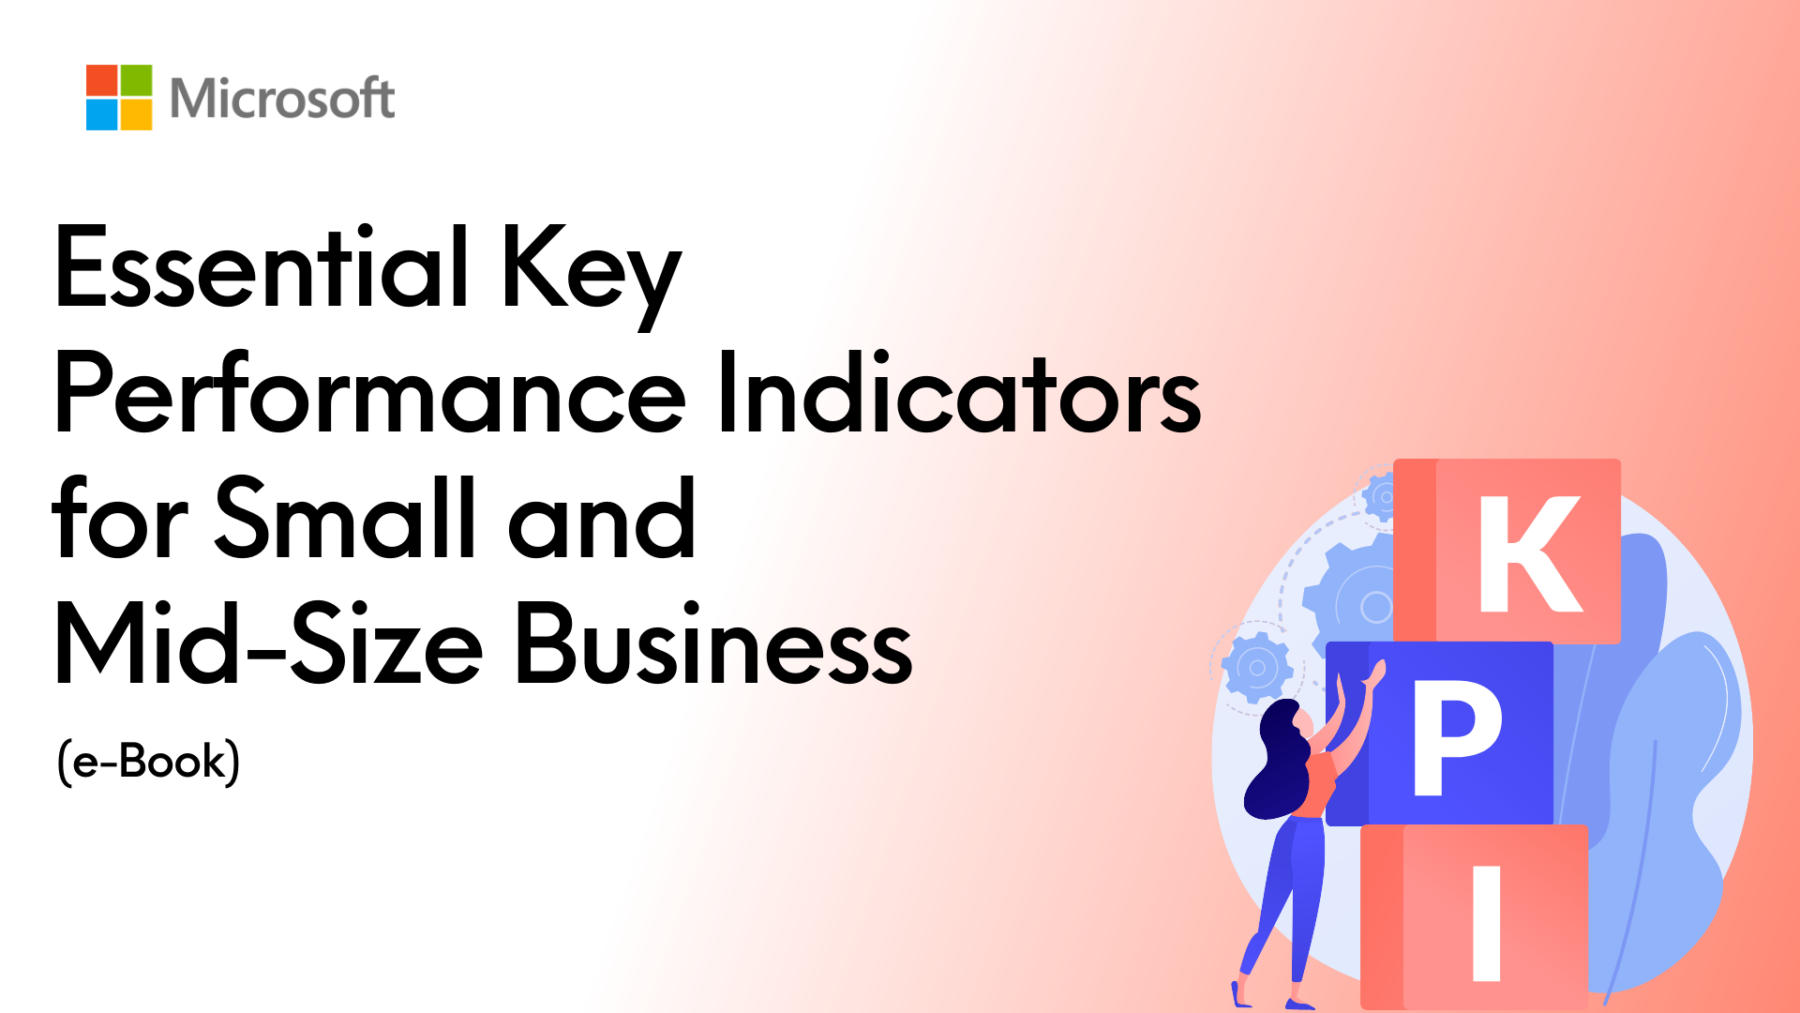 Essential Key Performance Indicators for Small and Mid-Size Business (e-Book)